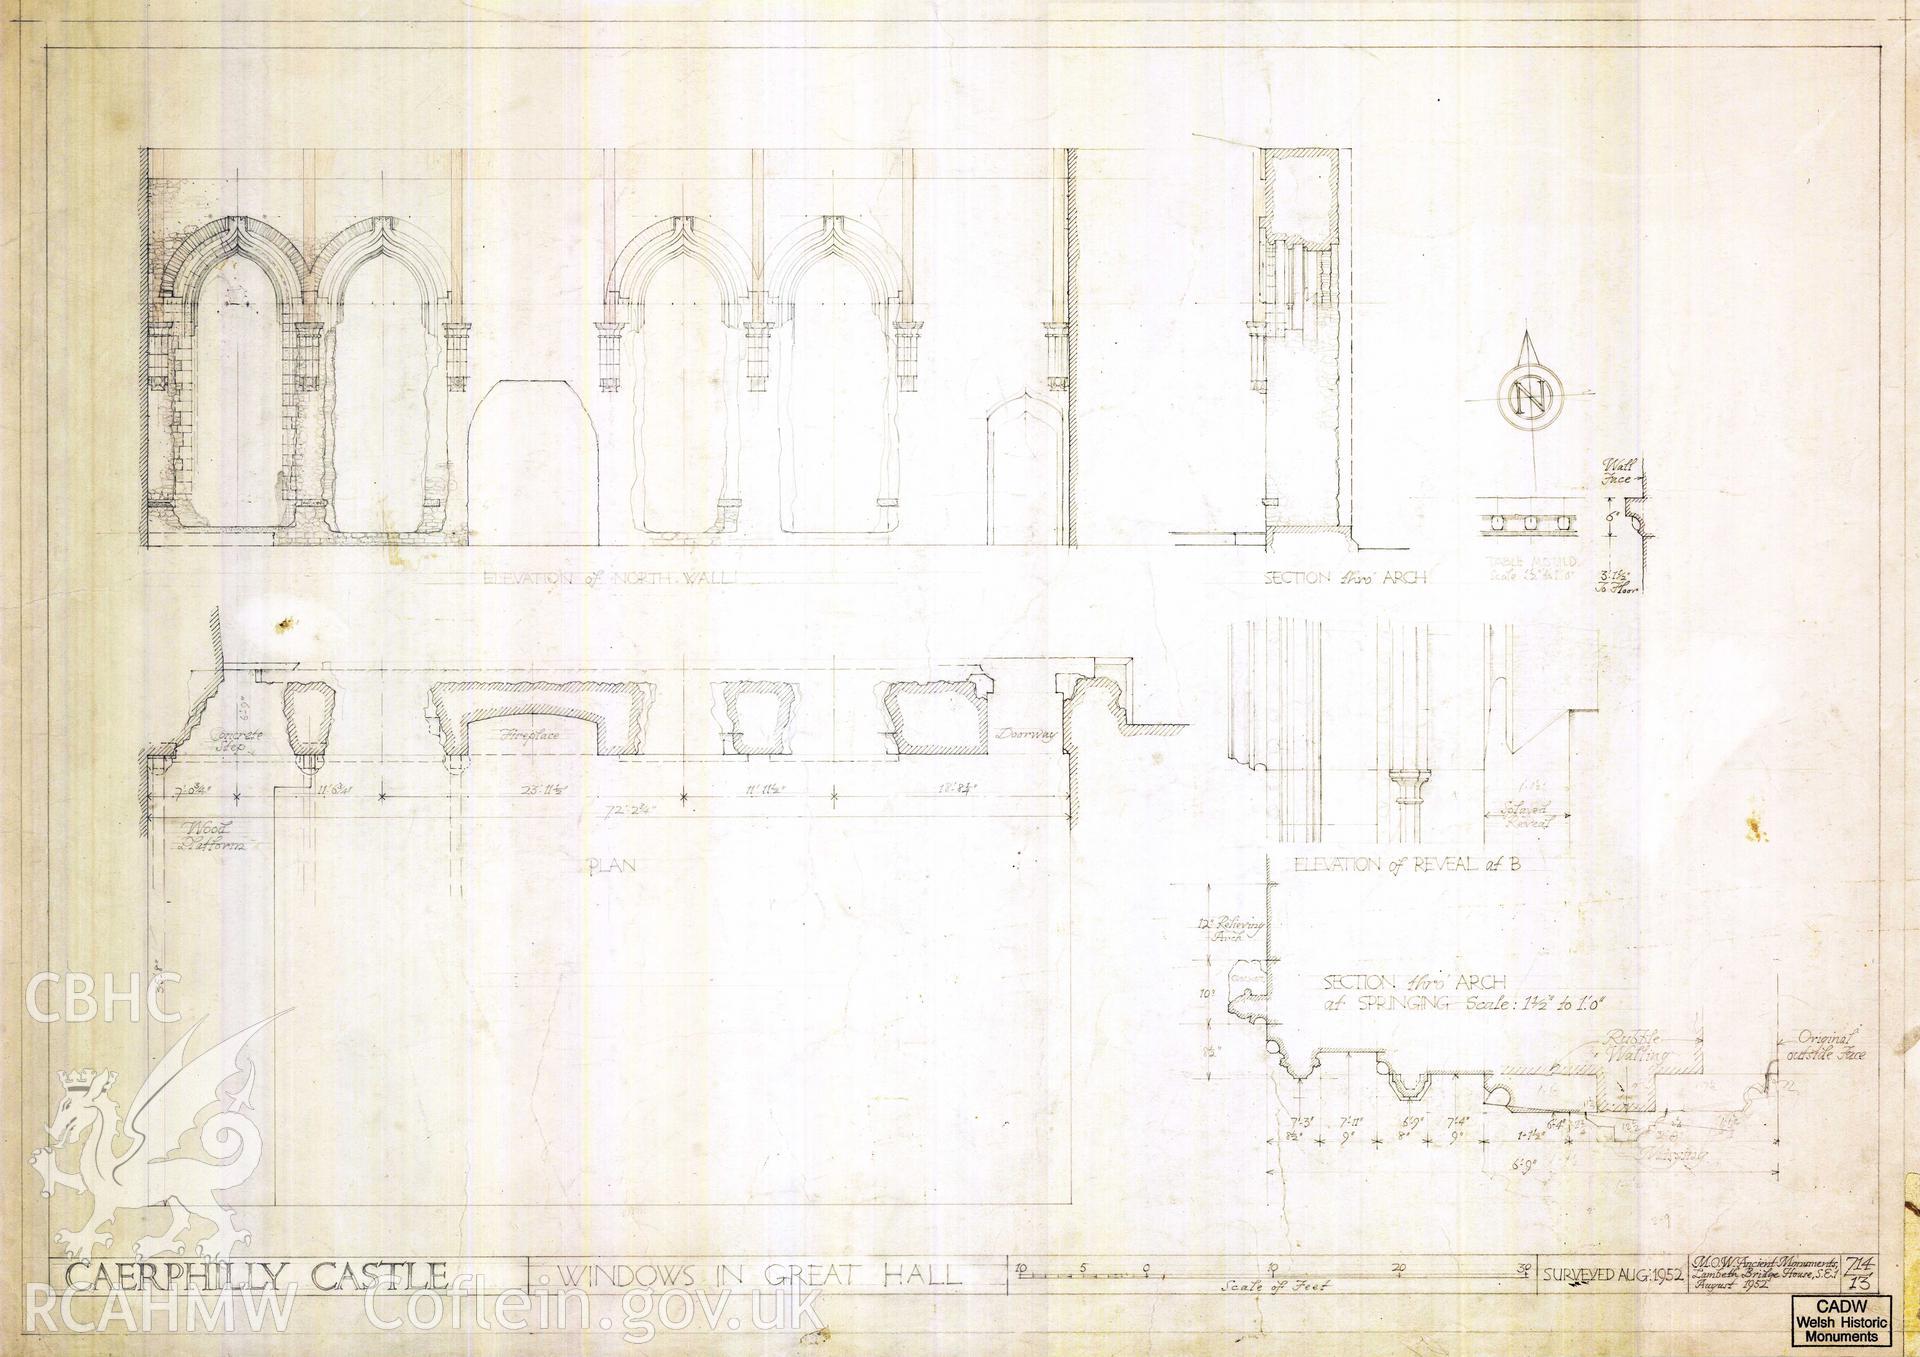 Cadw guardianship monument drawing of Caerphilly Castle. Hall, windows, int elev+plan. Cadw ref. no: 714/13. Scale 1:48.